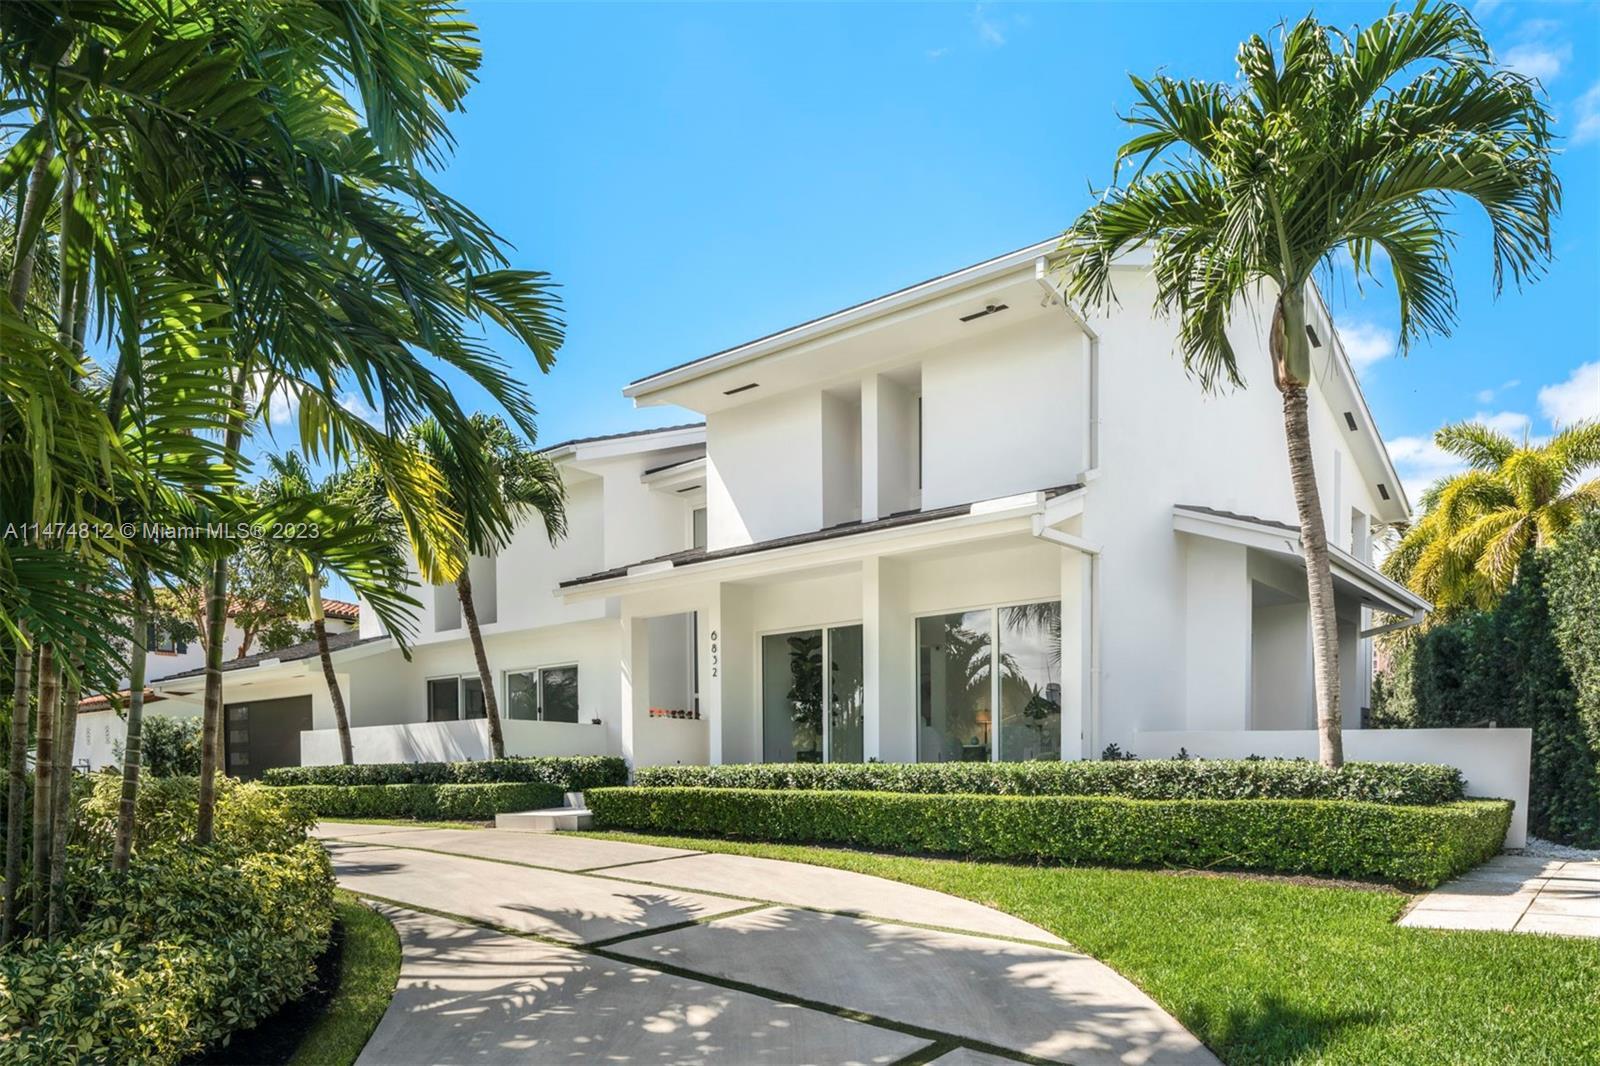 Photo of 6832 Sunrise Ct in Coral Gables, FL